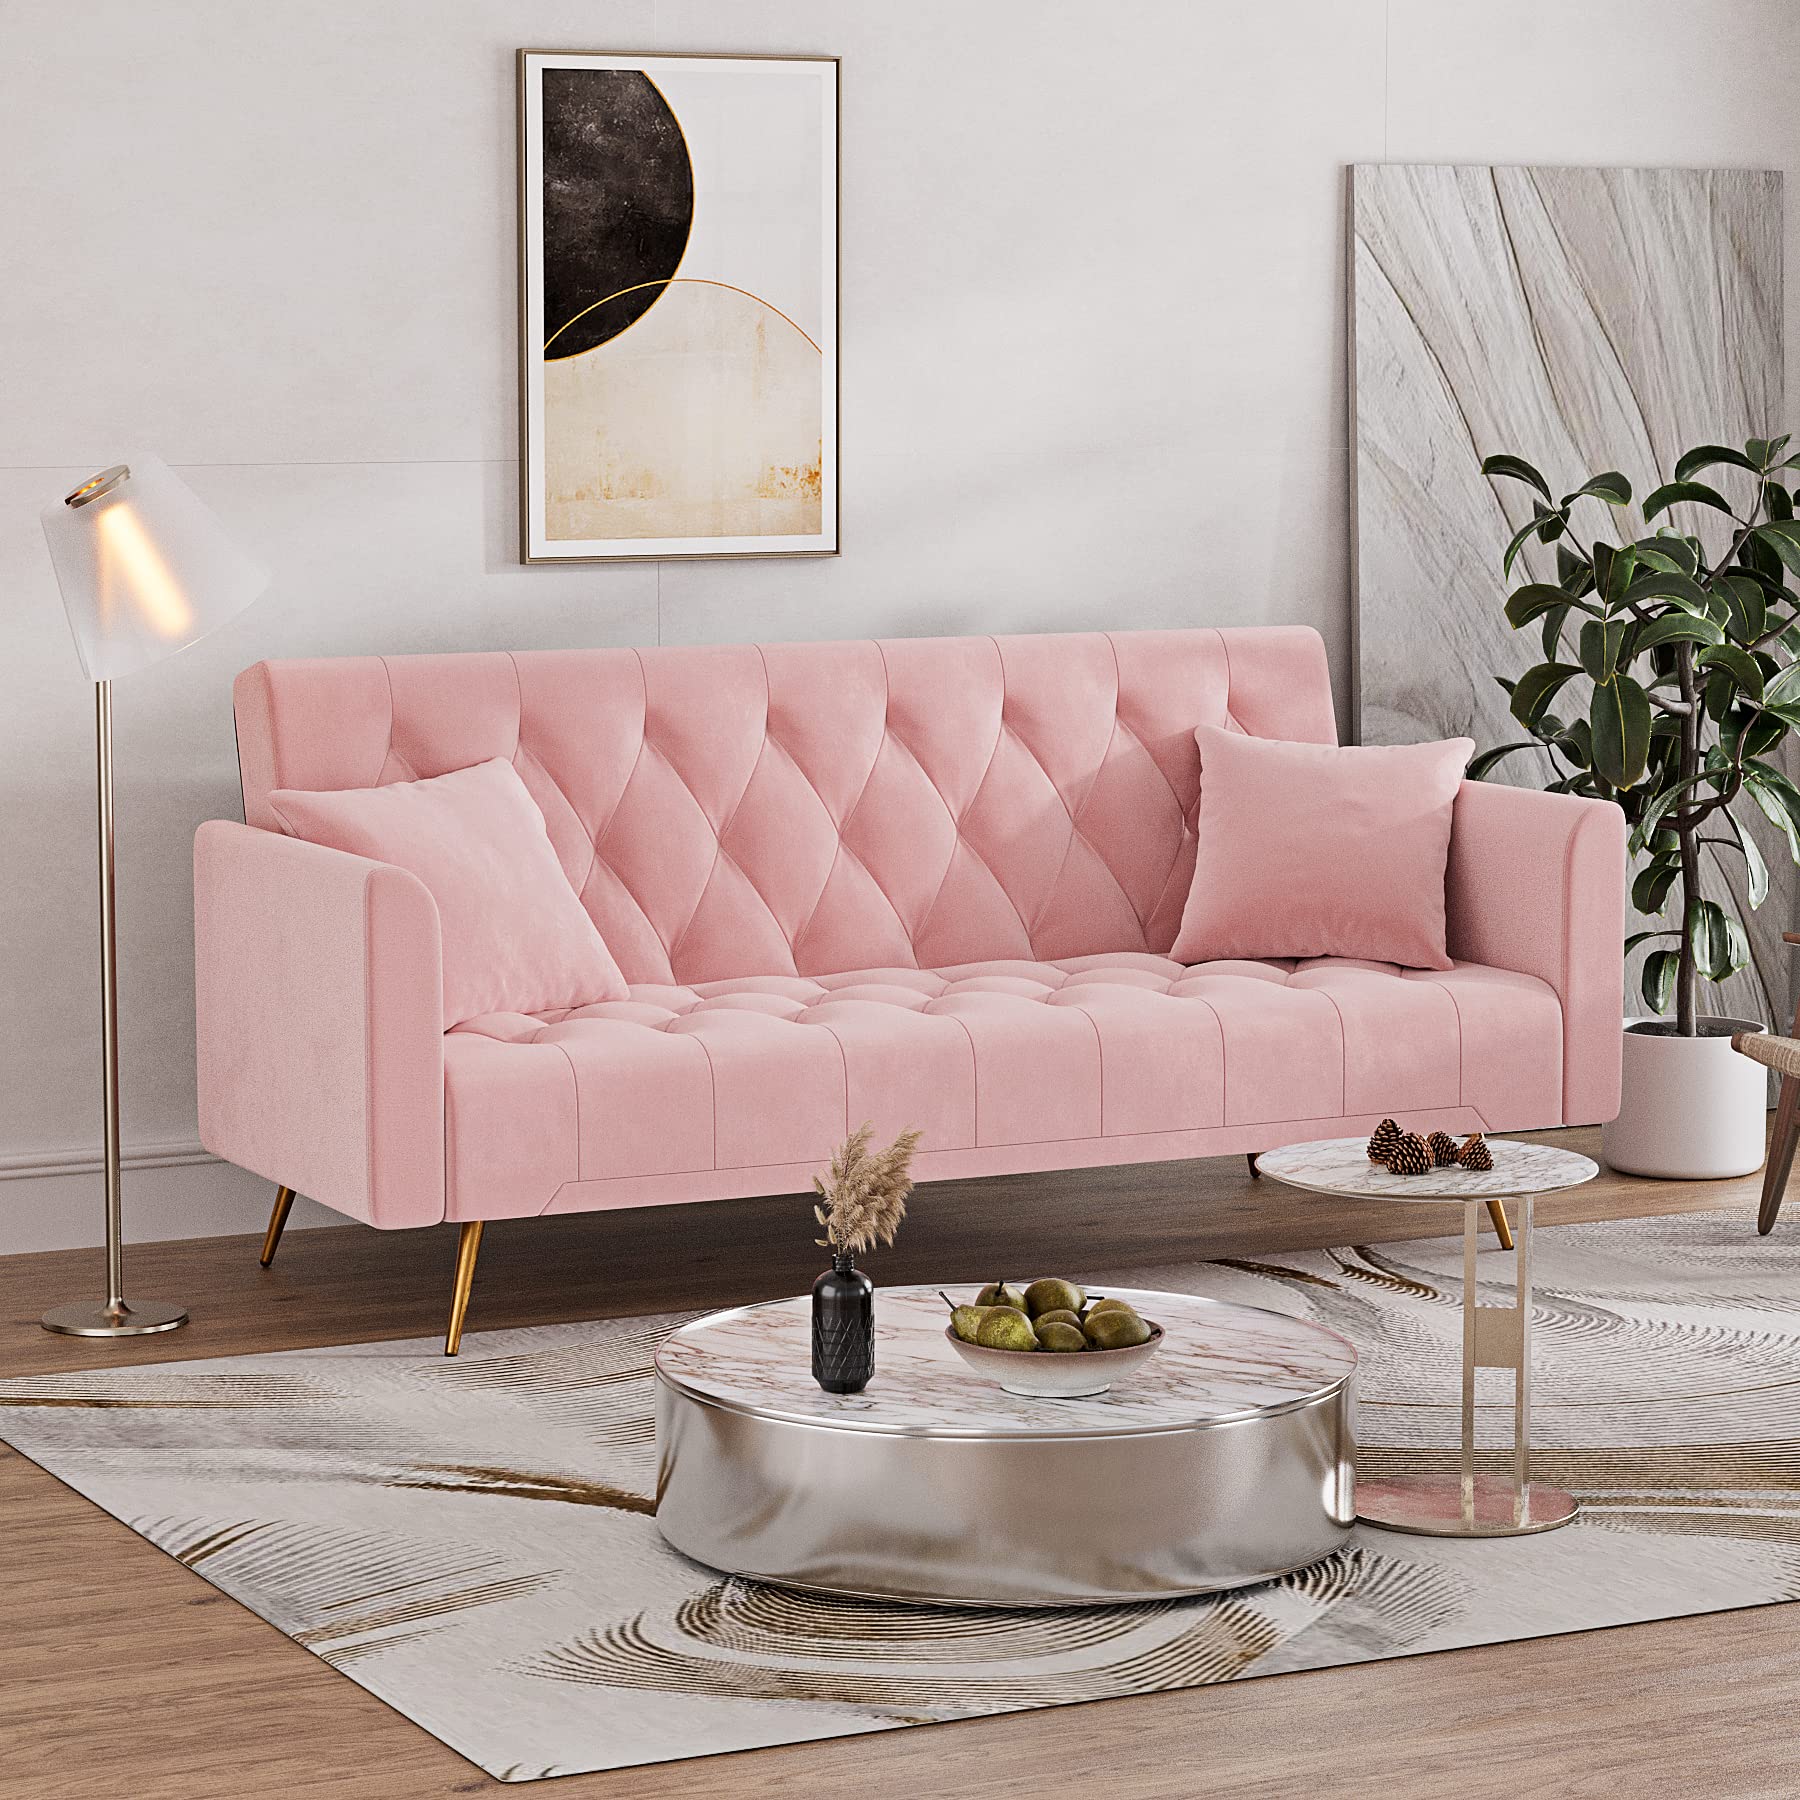 Where can I buy a pink couch for my living room